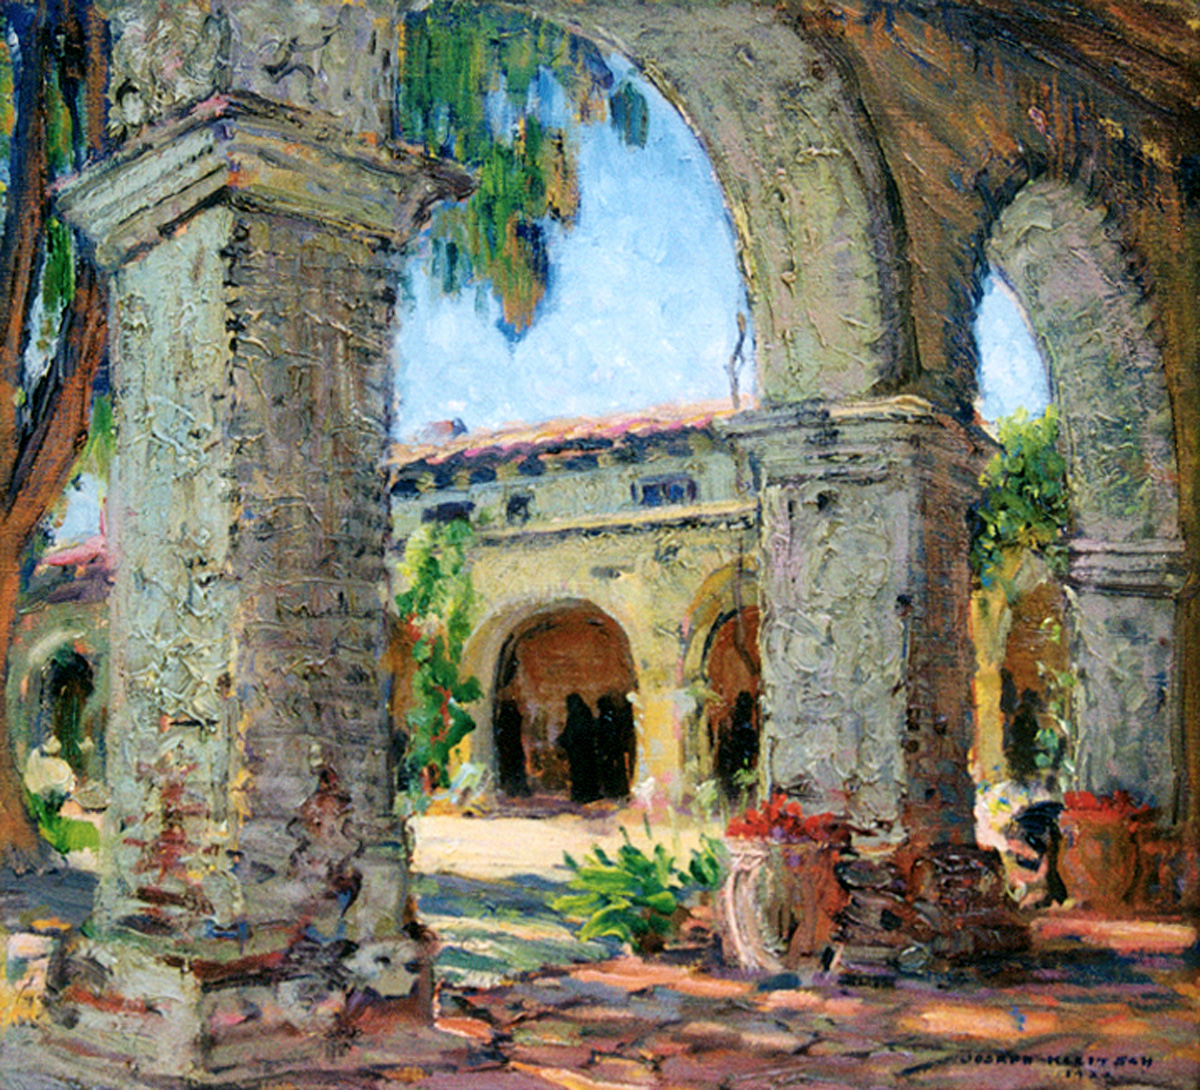    Through the Arches   / Oil on Canvas, 18 x 20 in. / Private Collection 